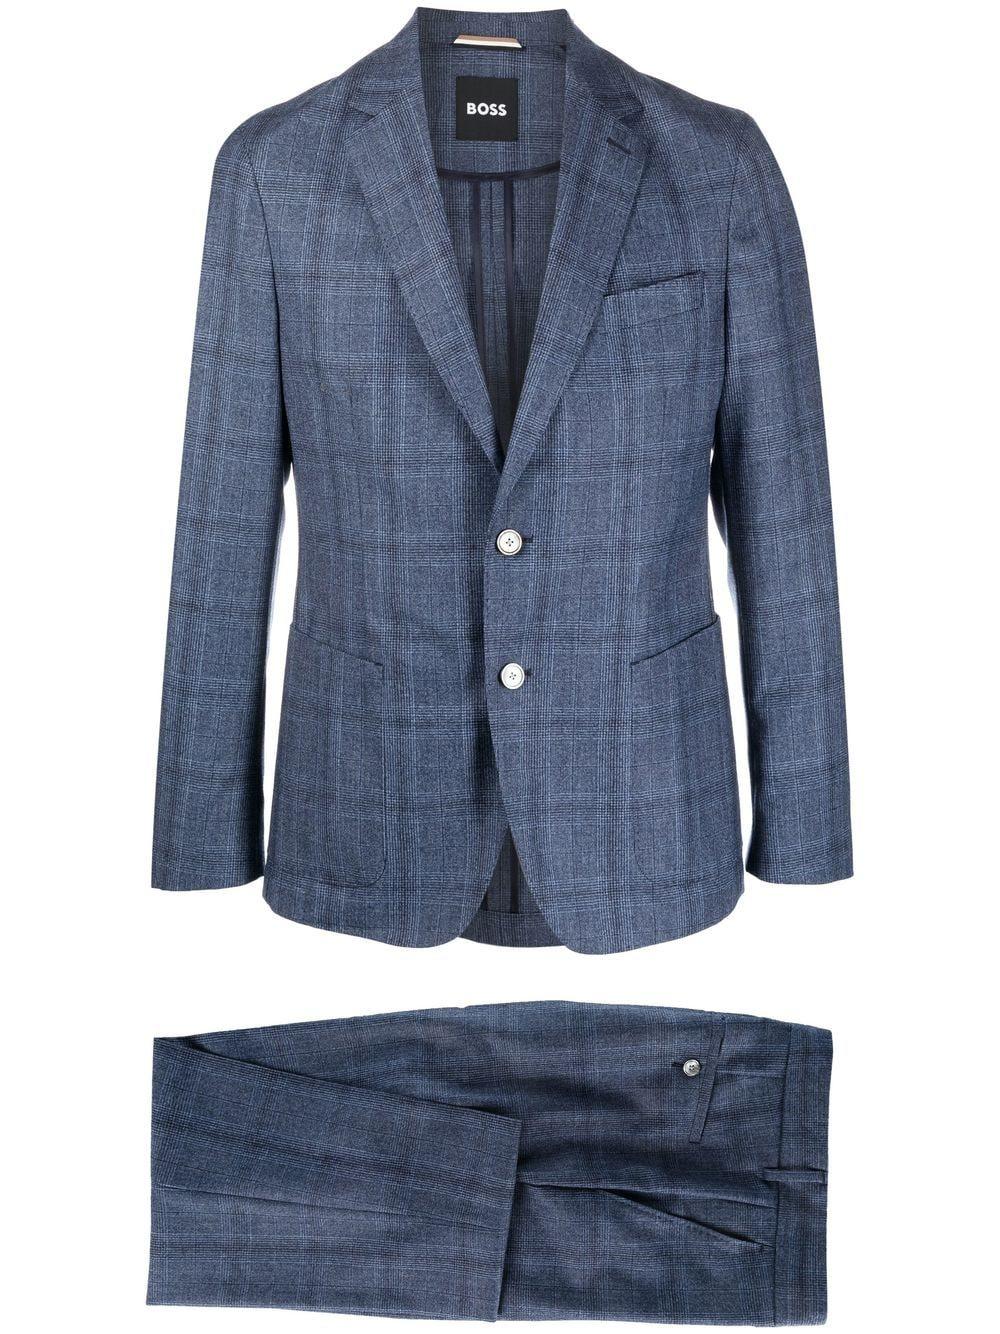 BOSS by HUGO BOSS Check-print Two-piece Suit in Blue for Men | Lyst